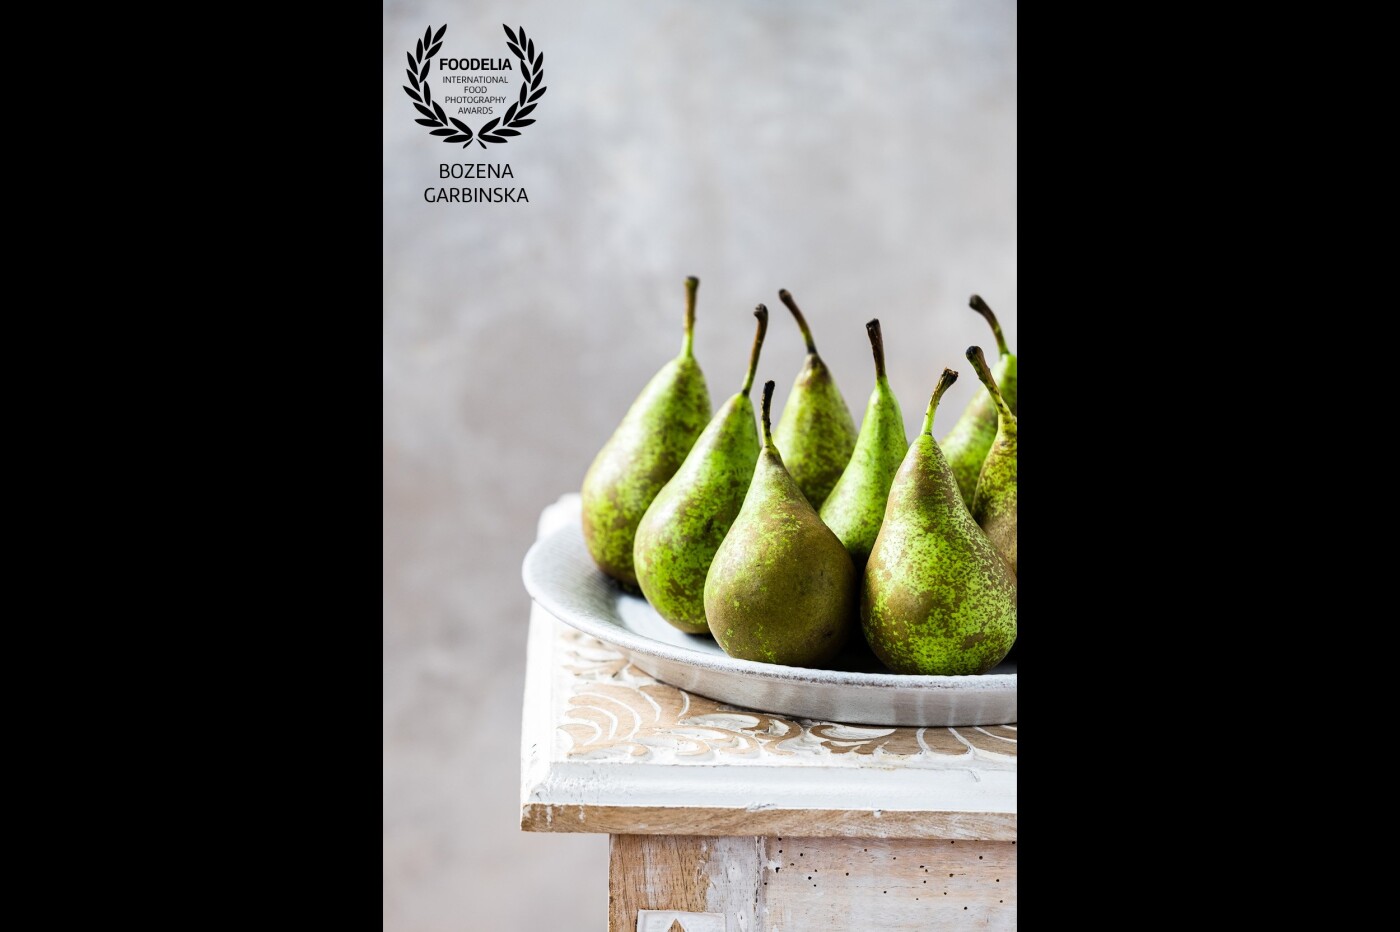 Juicy pears on the table<br />
Camera: Fuji X-T3<br />
Lens: Fujinon 80 mm<br />
Settings: ISO 200, 80mm, 1/3s, f/4.0<br />
Shot using natural light.